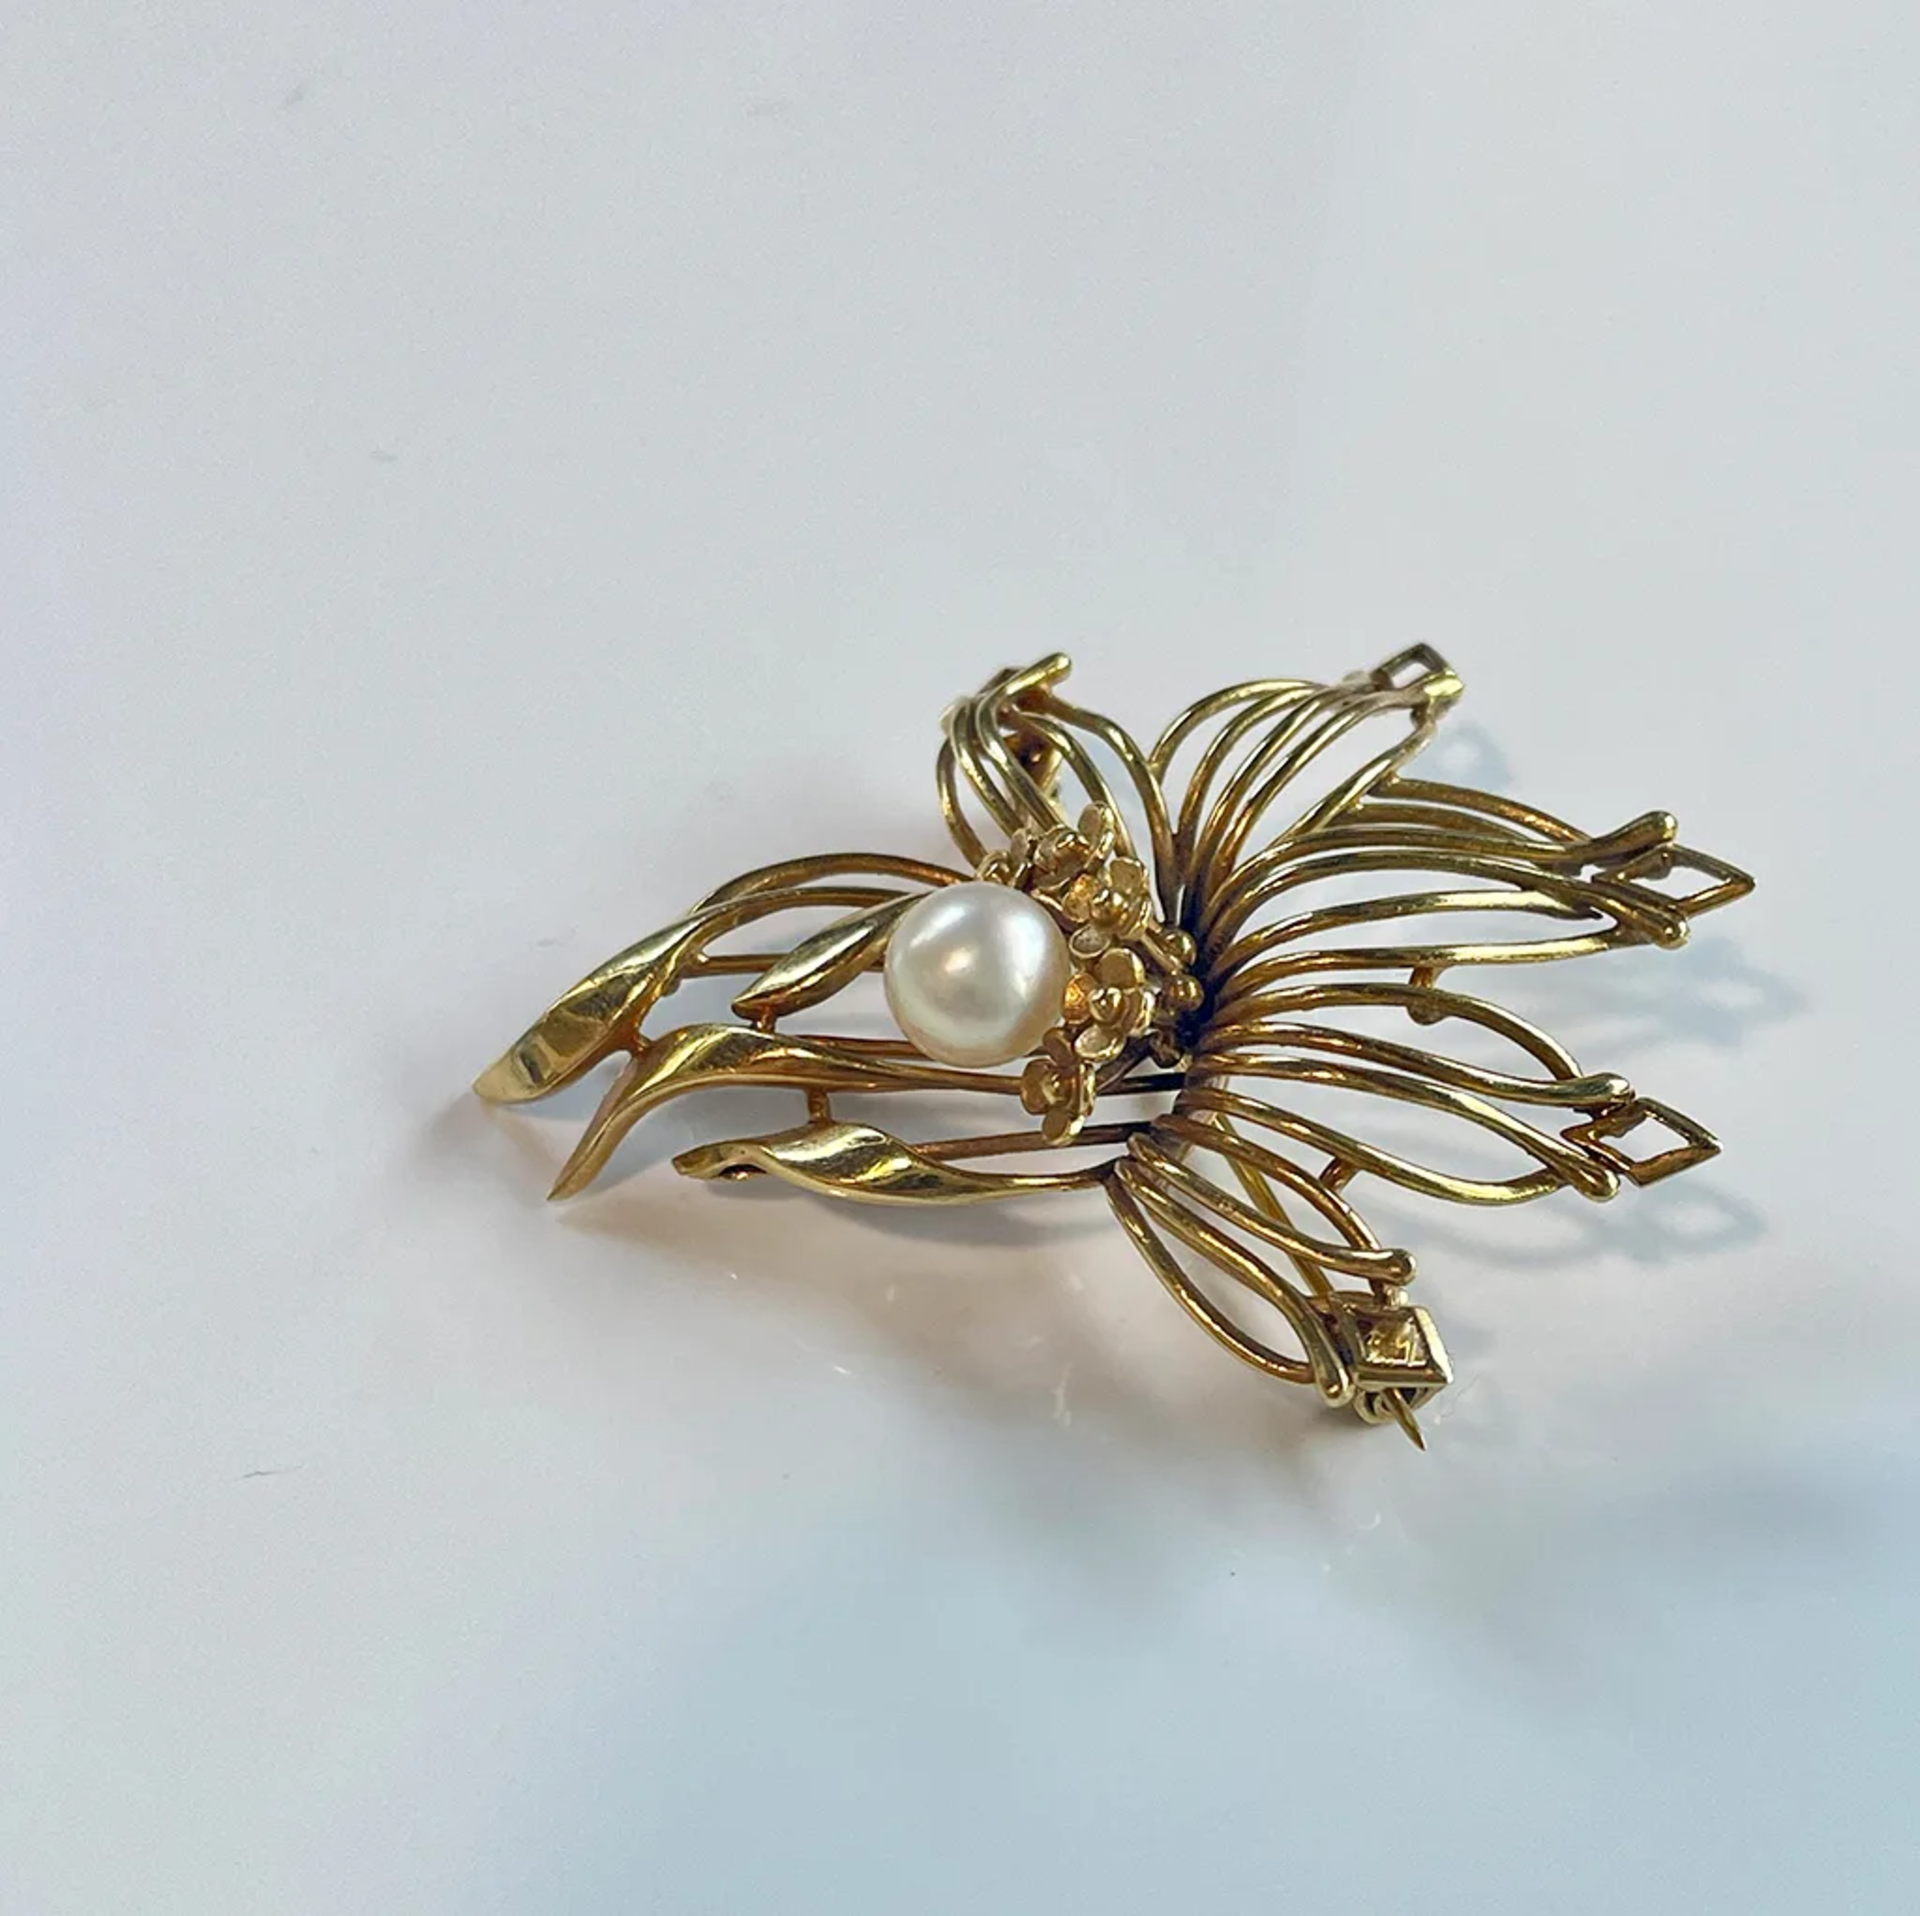 Abstract Vintage Brooch with Pearl 18K Yellow Gold - Image 2 of 4